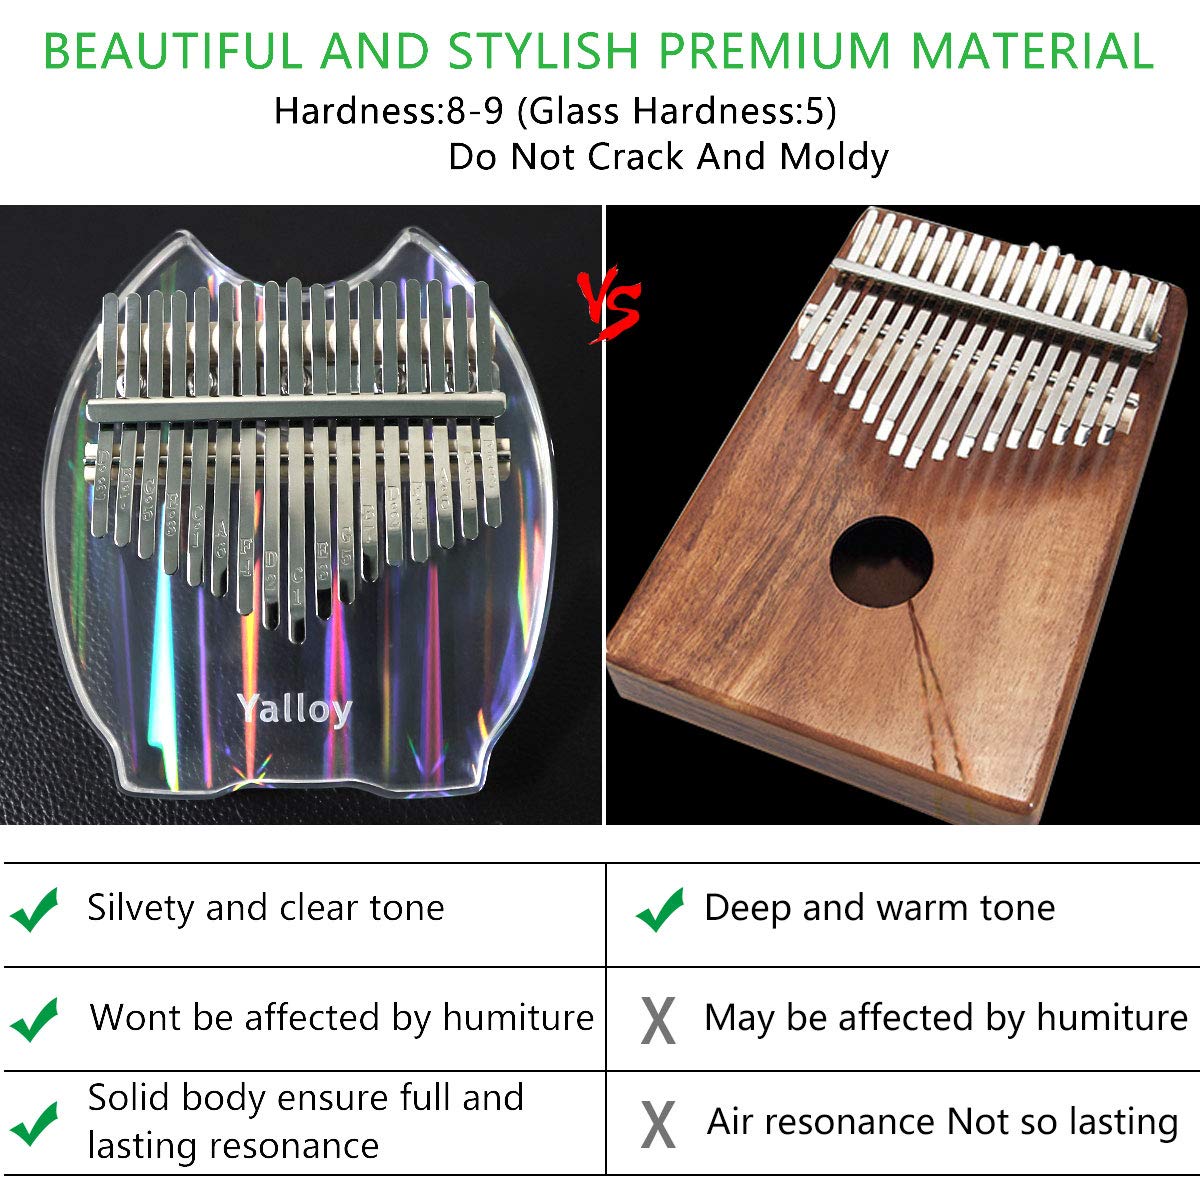 Kalimba Thumb Piano 17 keys, Upgraded Rainbow Crystal Clear Kalimba, Acrylic Mbira Finger Piano with EVA Bag, Musical Instrument Gifts for Kids Adult Beginners with Tune Hammer Study Booklet Stickers